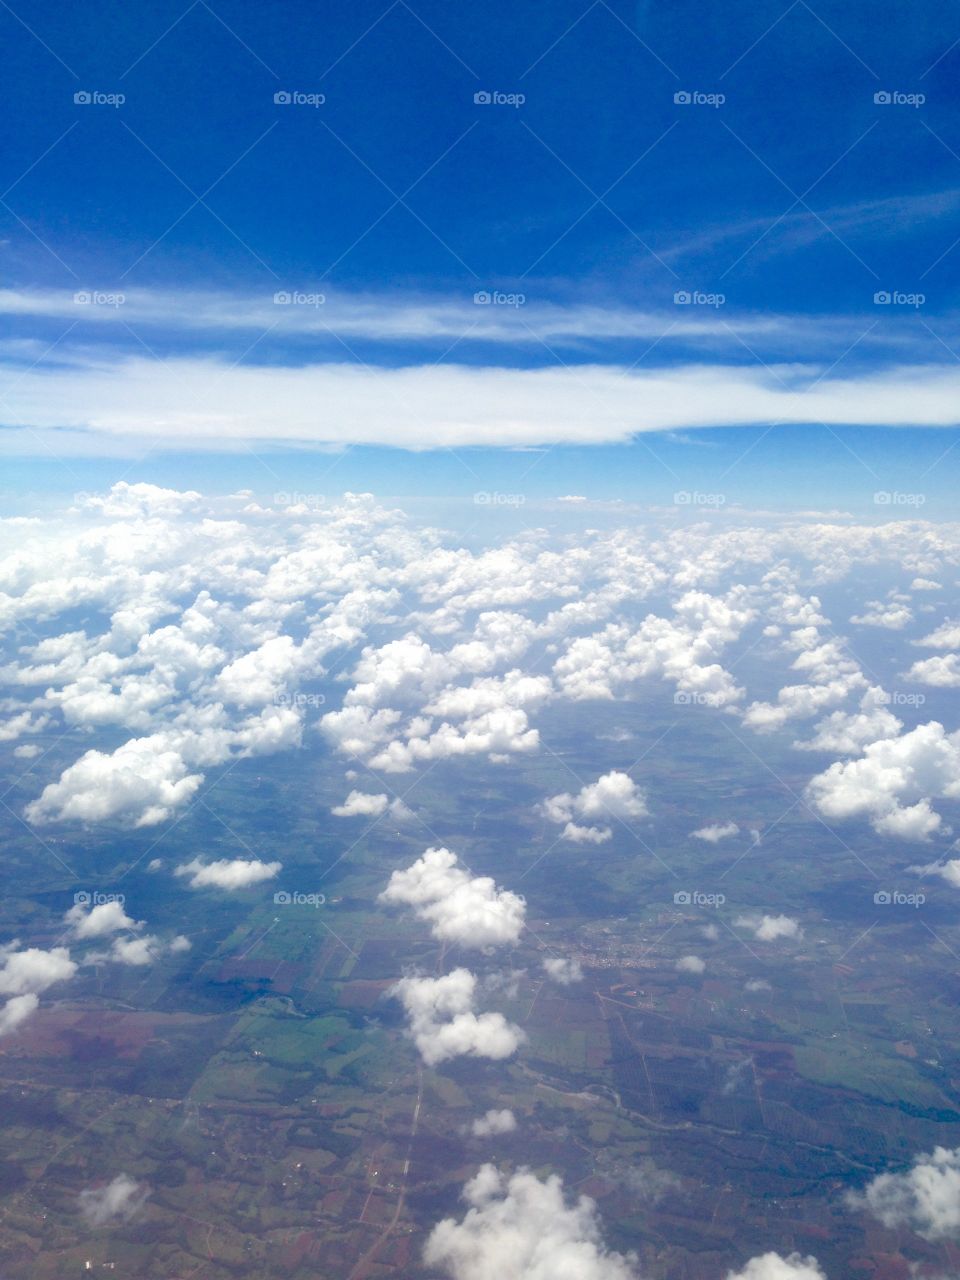 Clouds Over Florida. On the way to Costa Rica